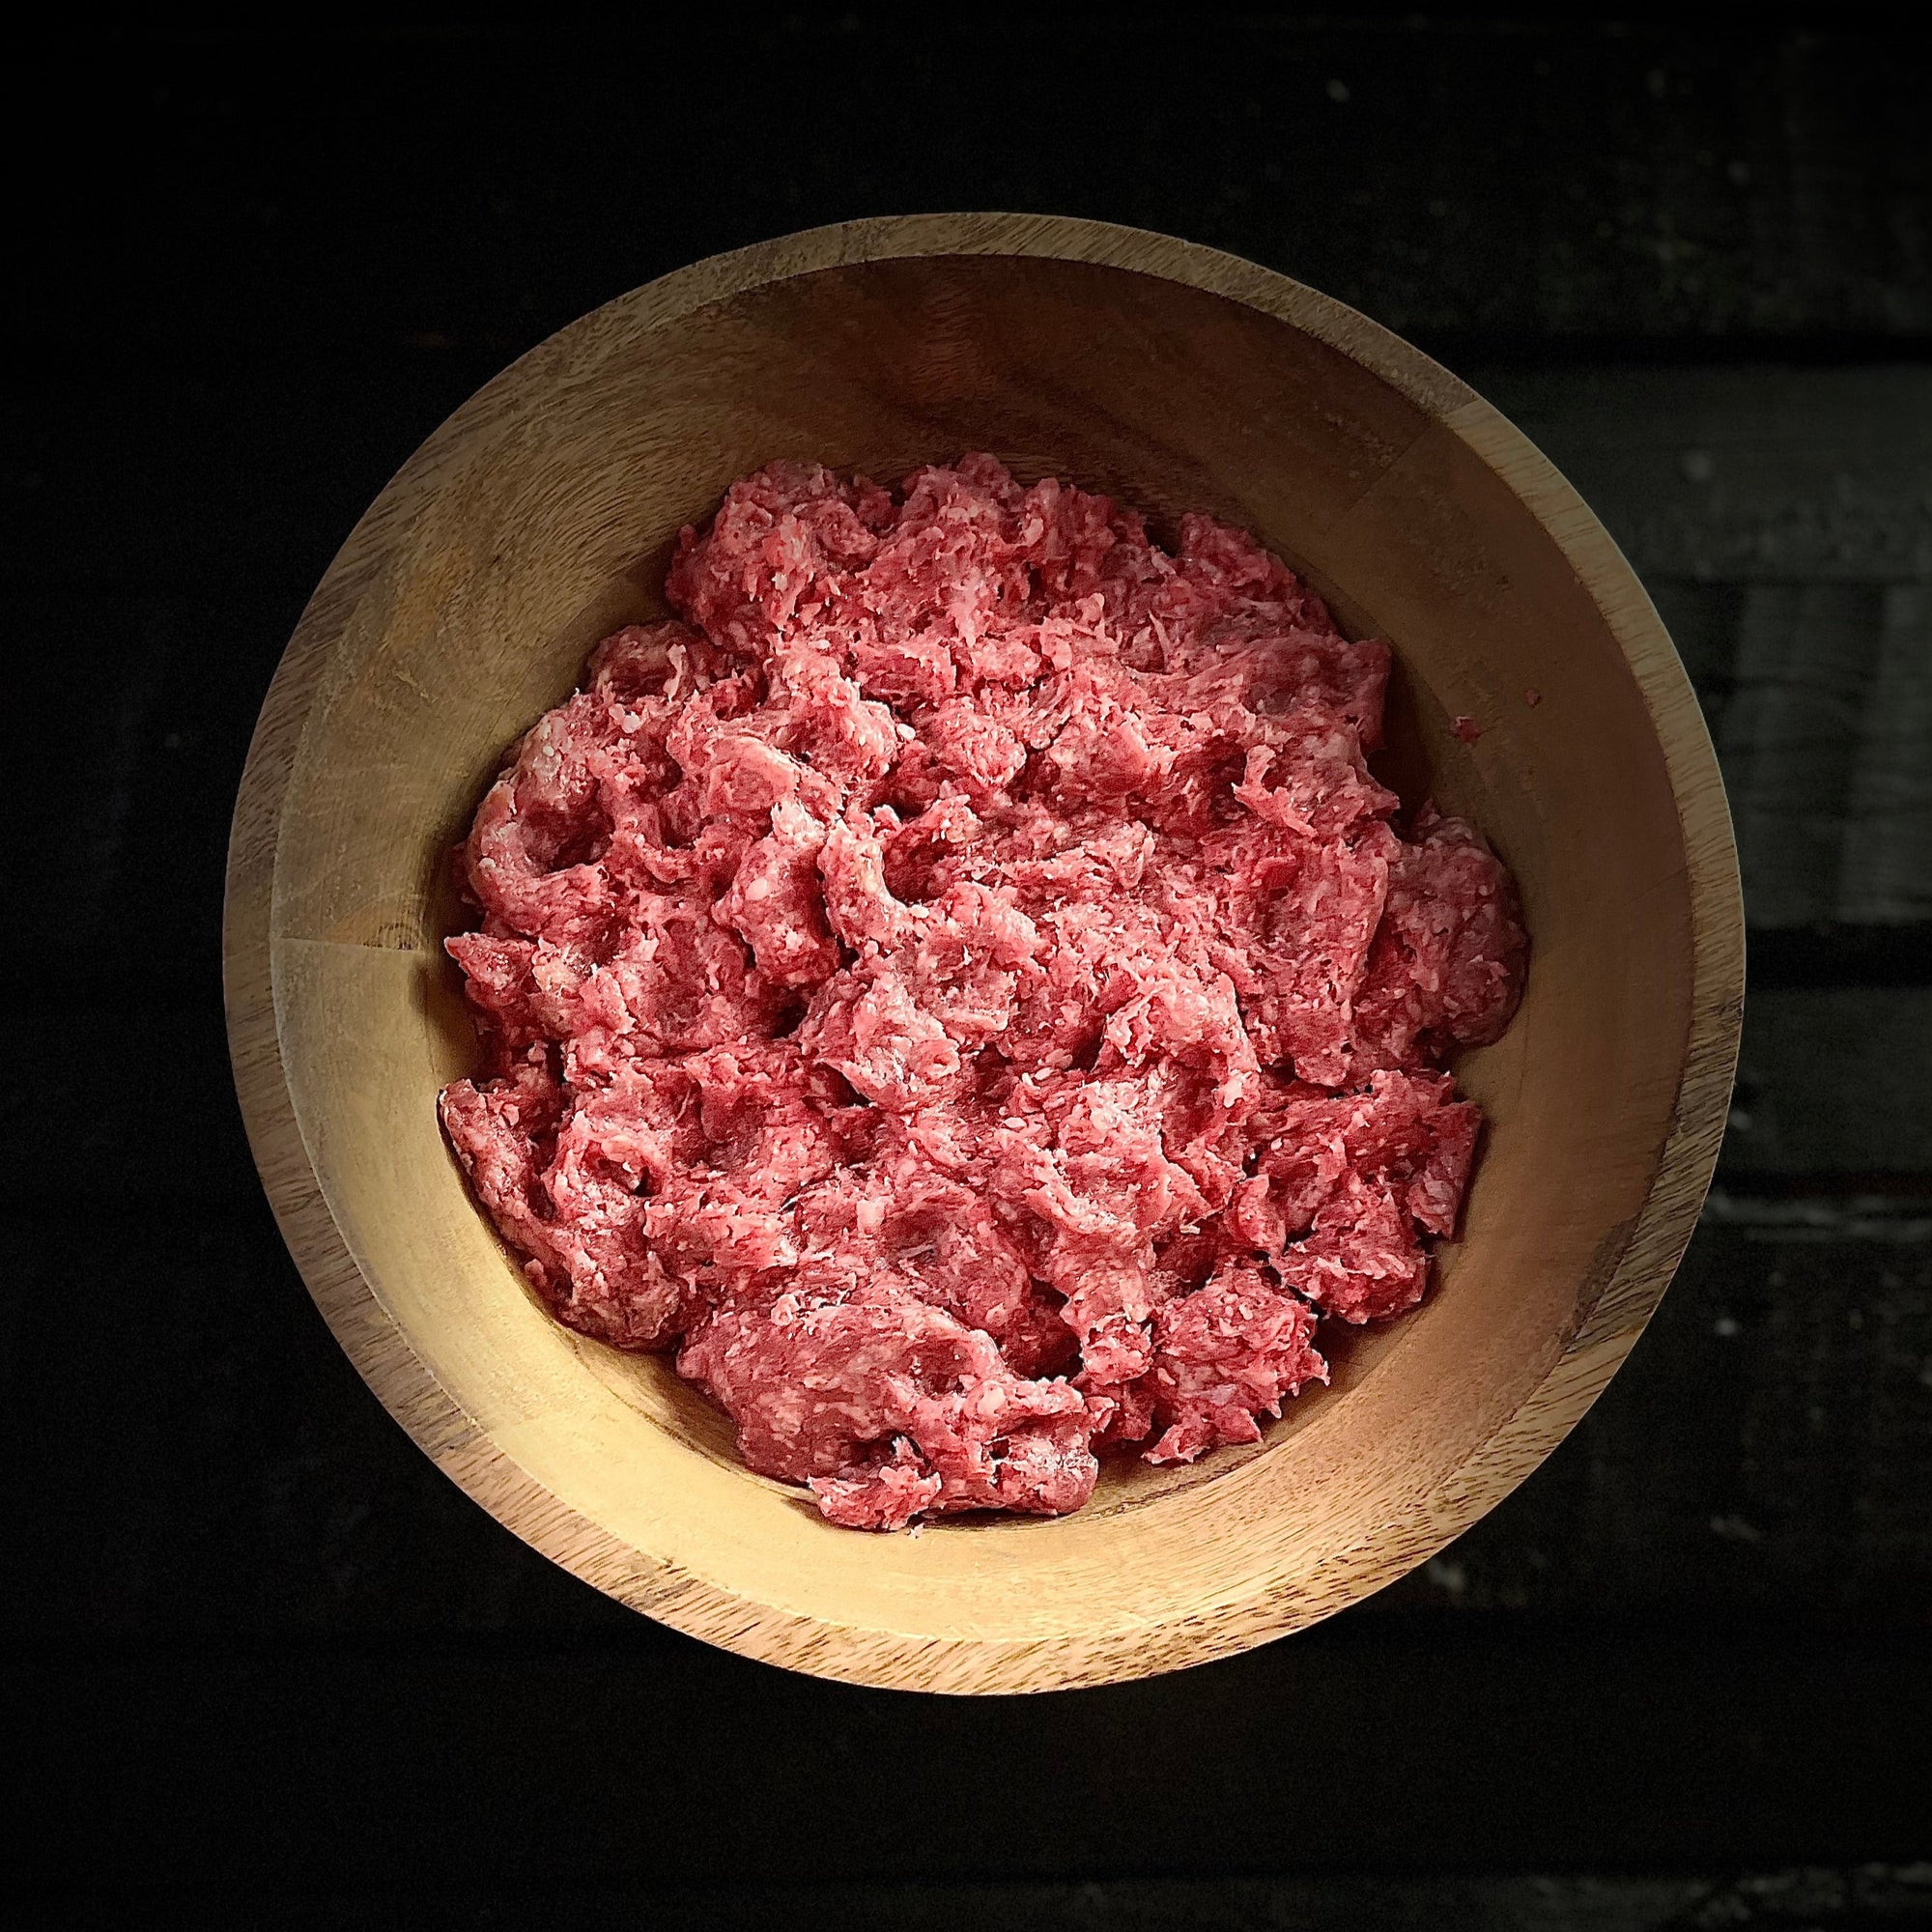 Raw ground beef spread out in wood bowl on slab